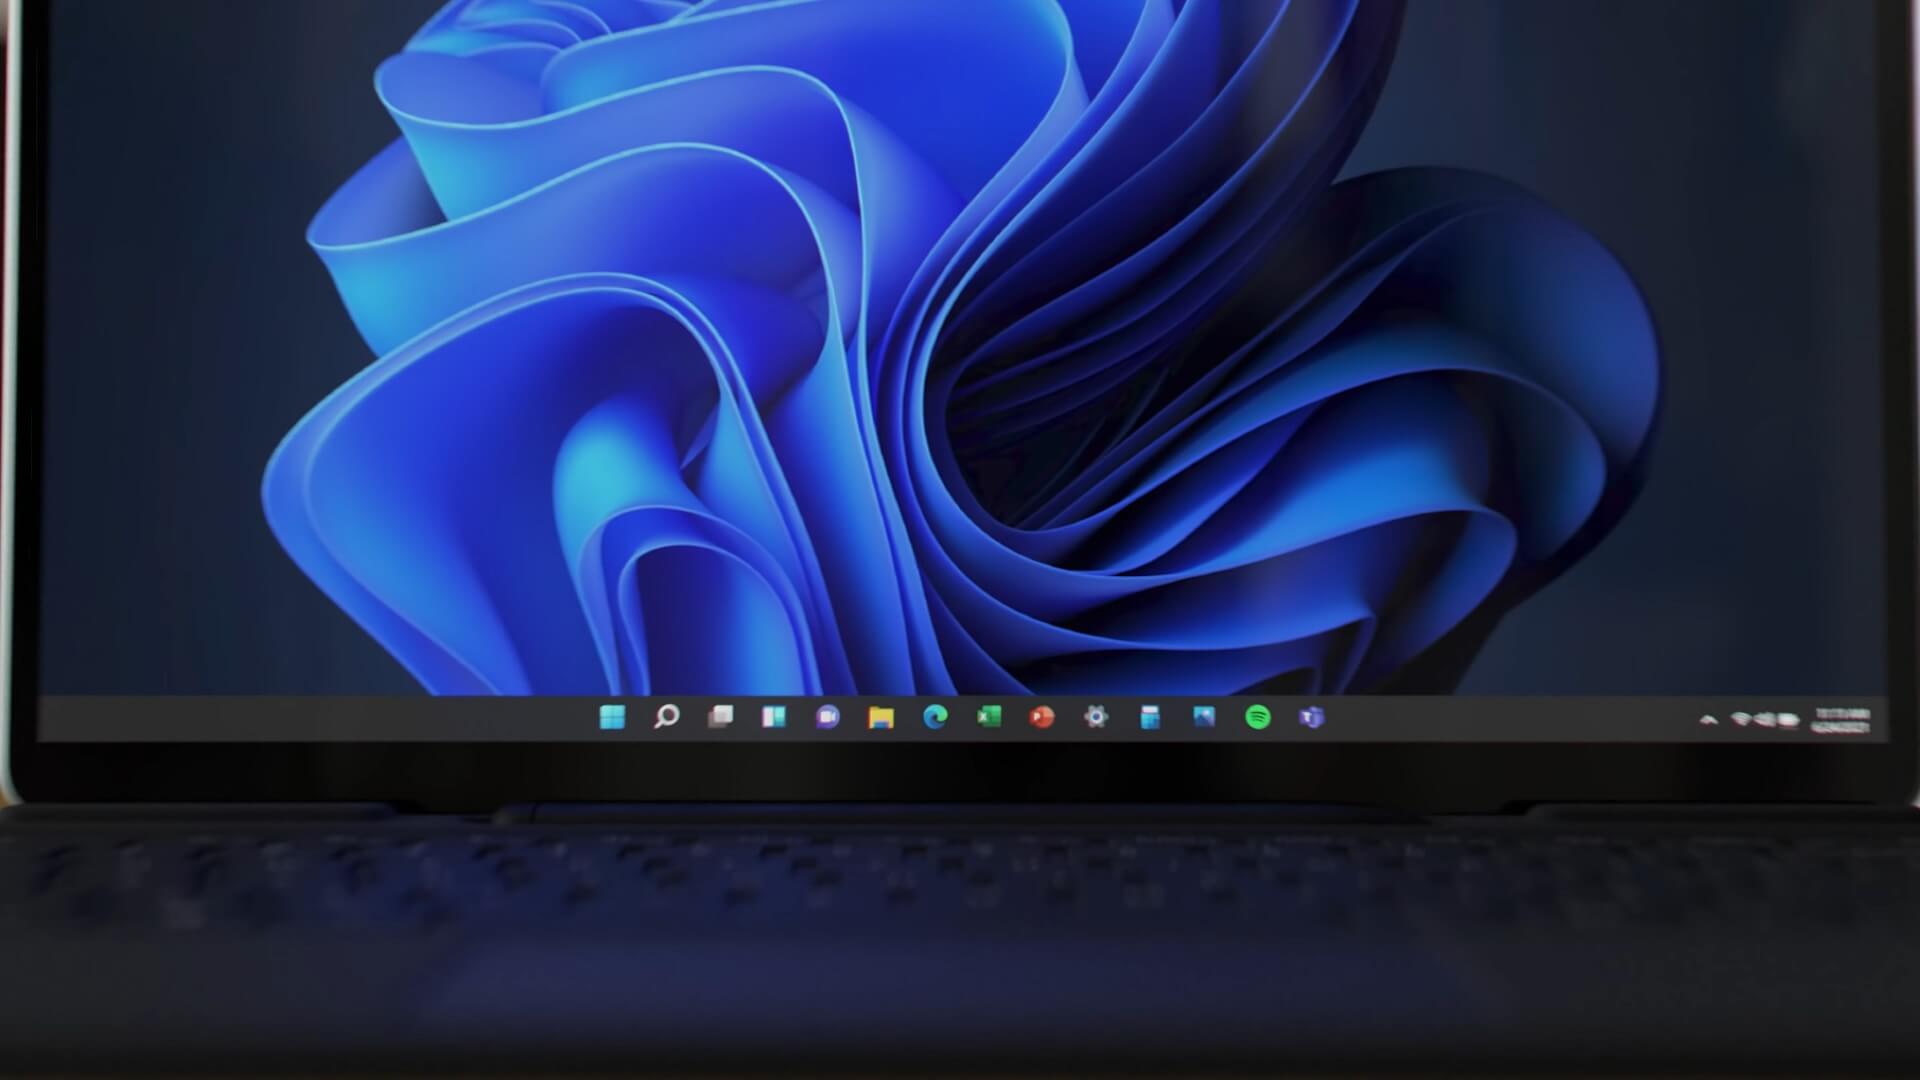 Mysterious Windows 11 Taskbar With Rounded Corners Show Up In Preview